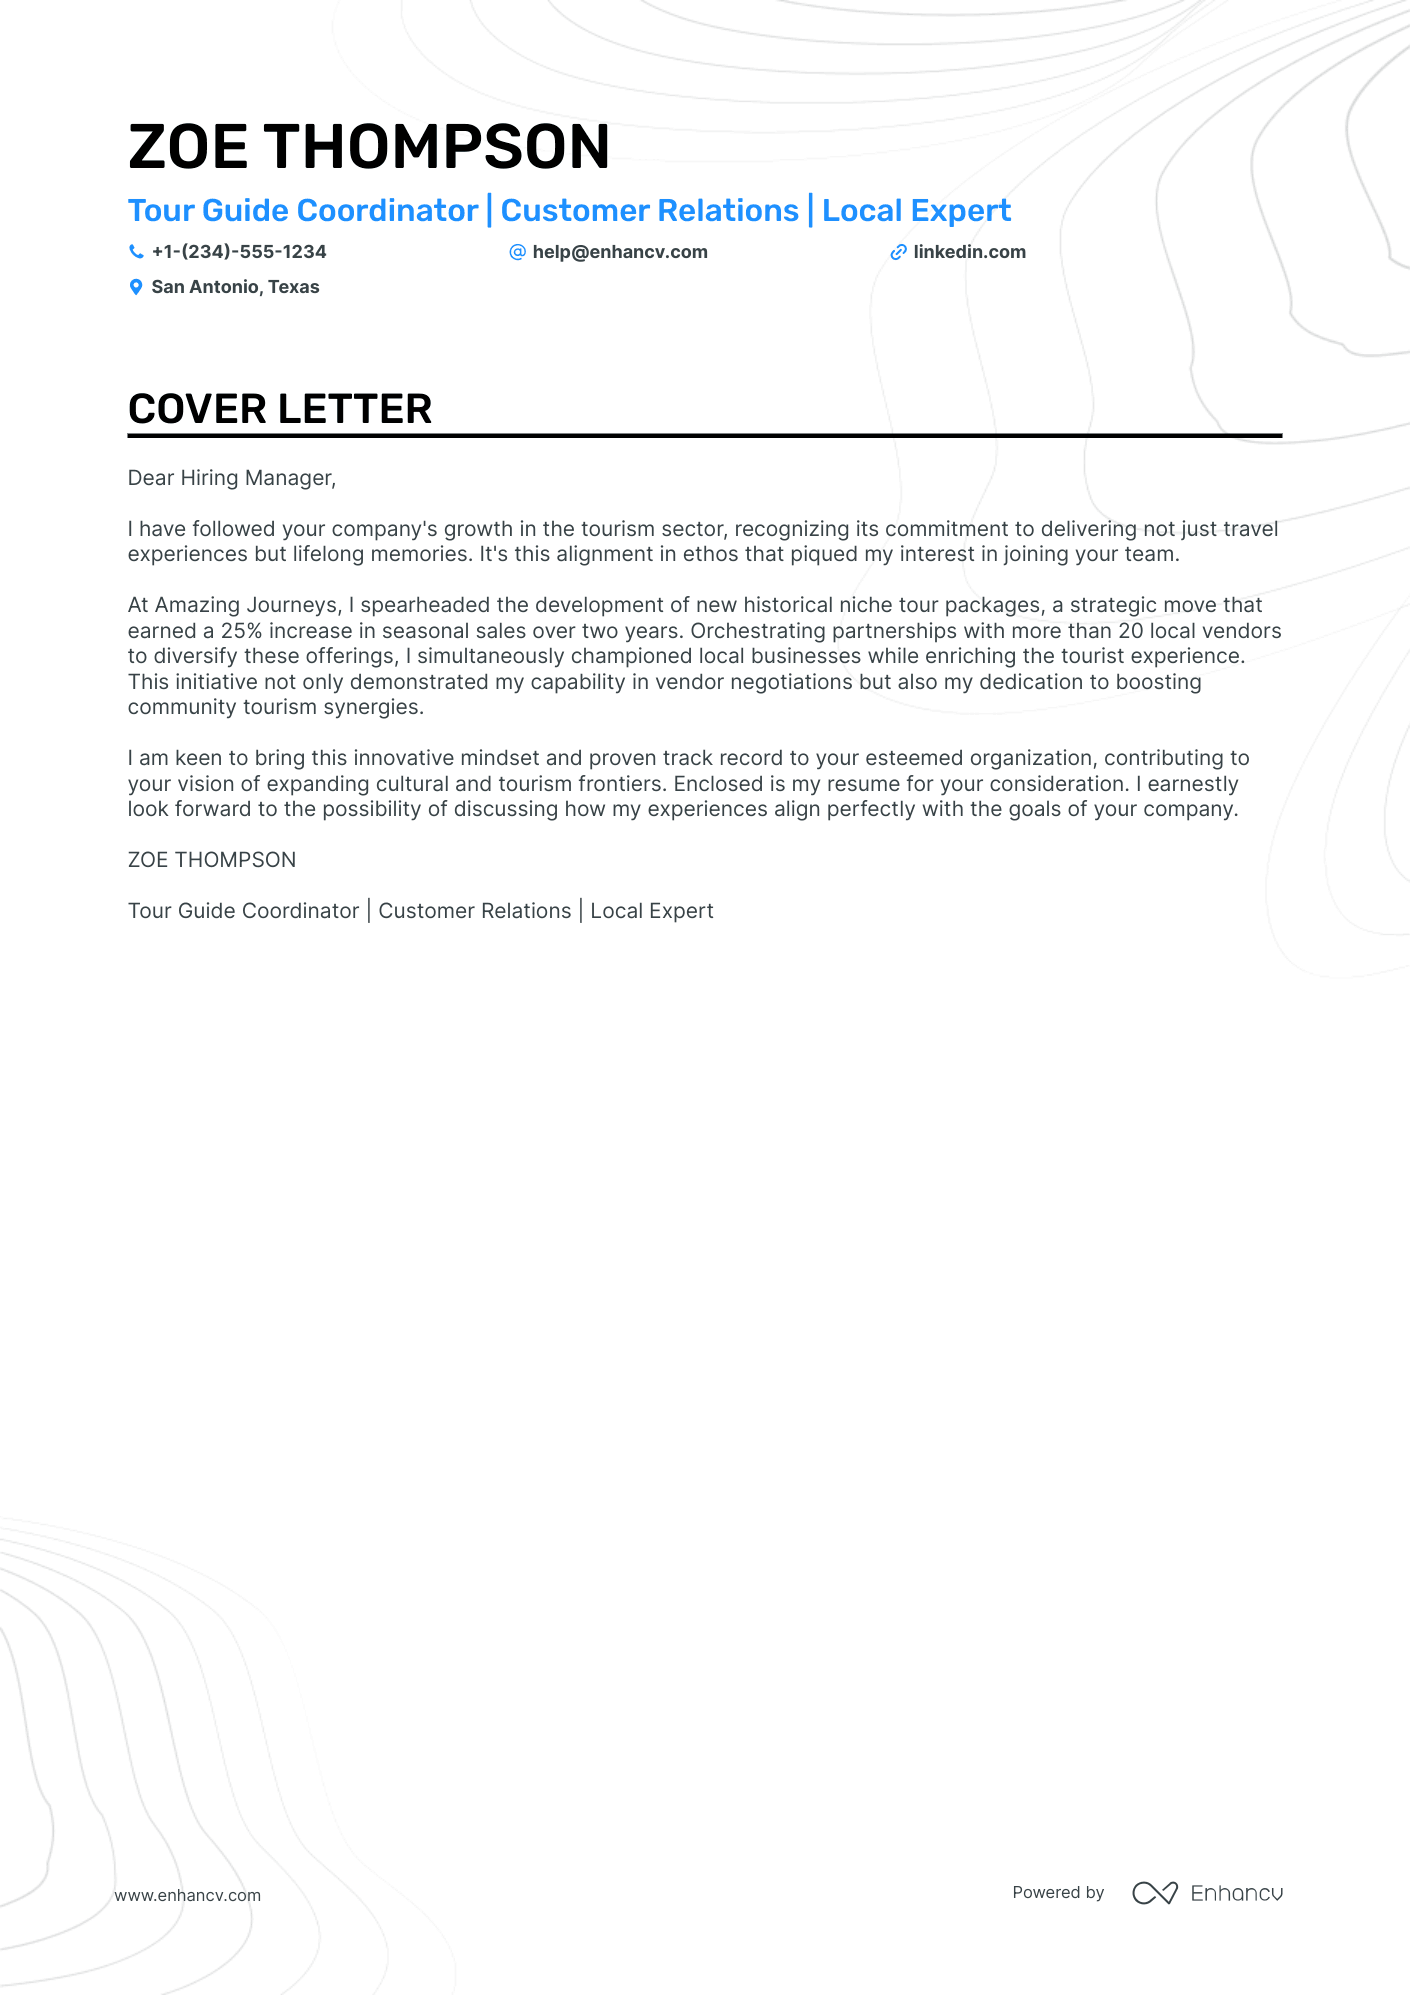 Tour Guide cover letter